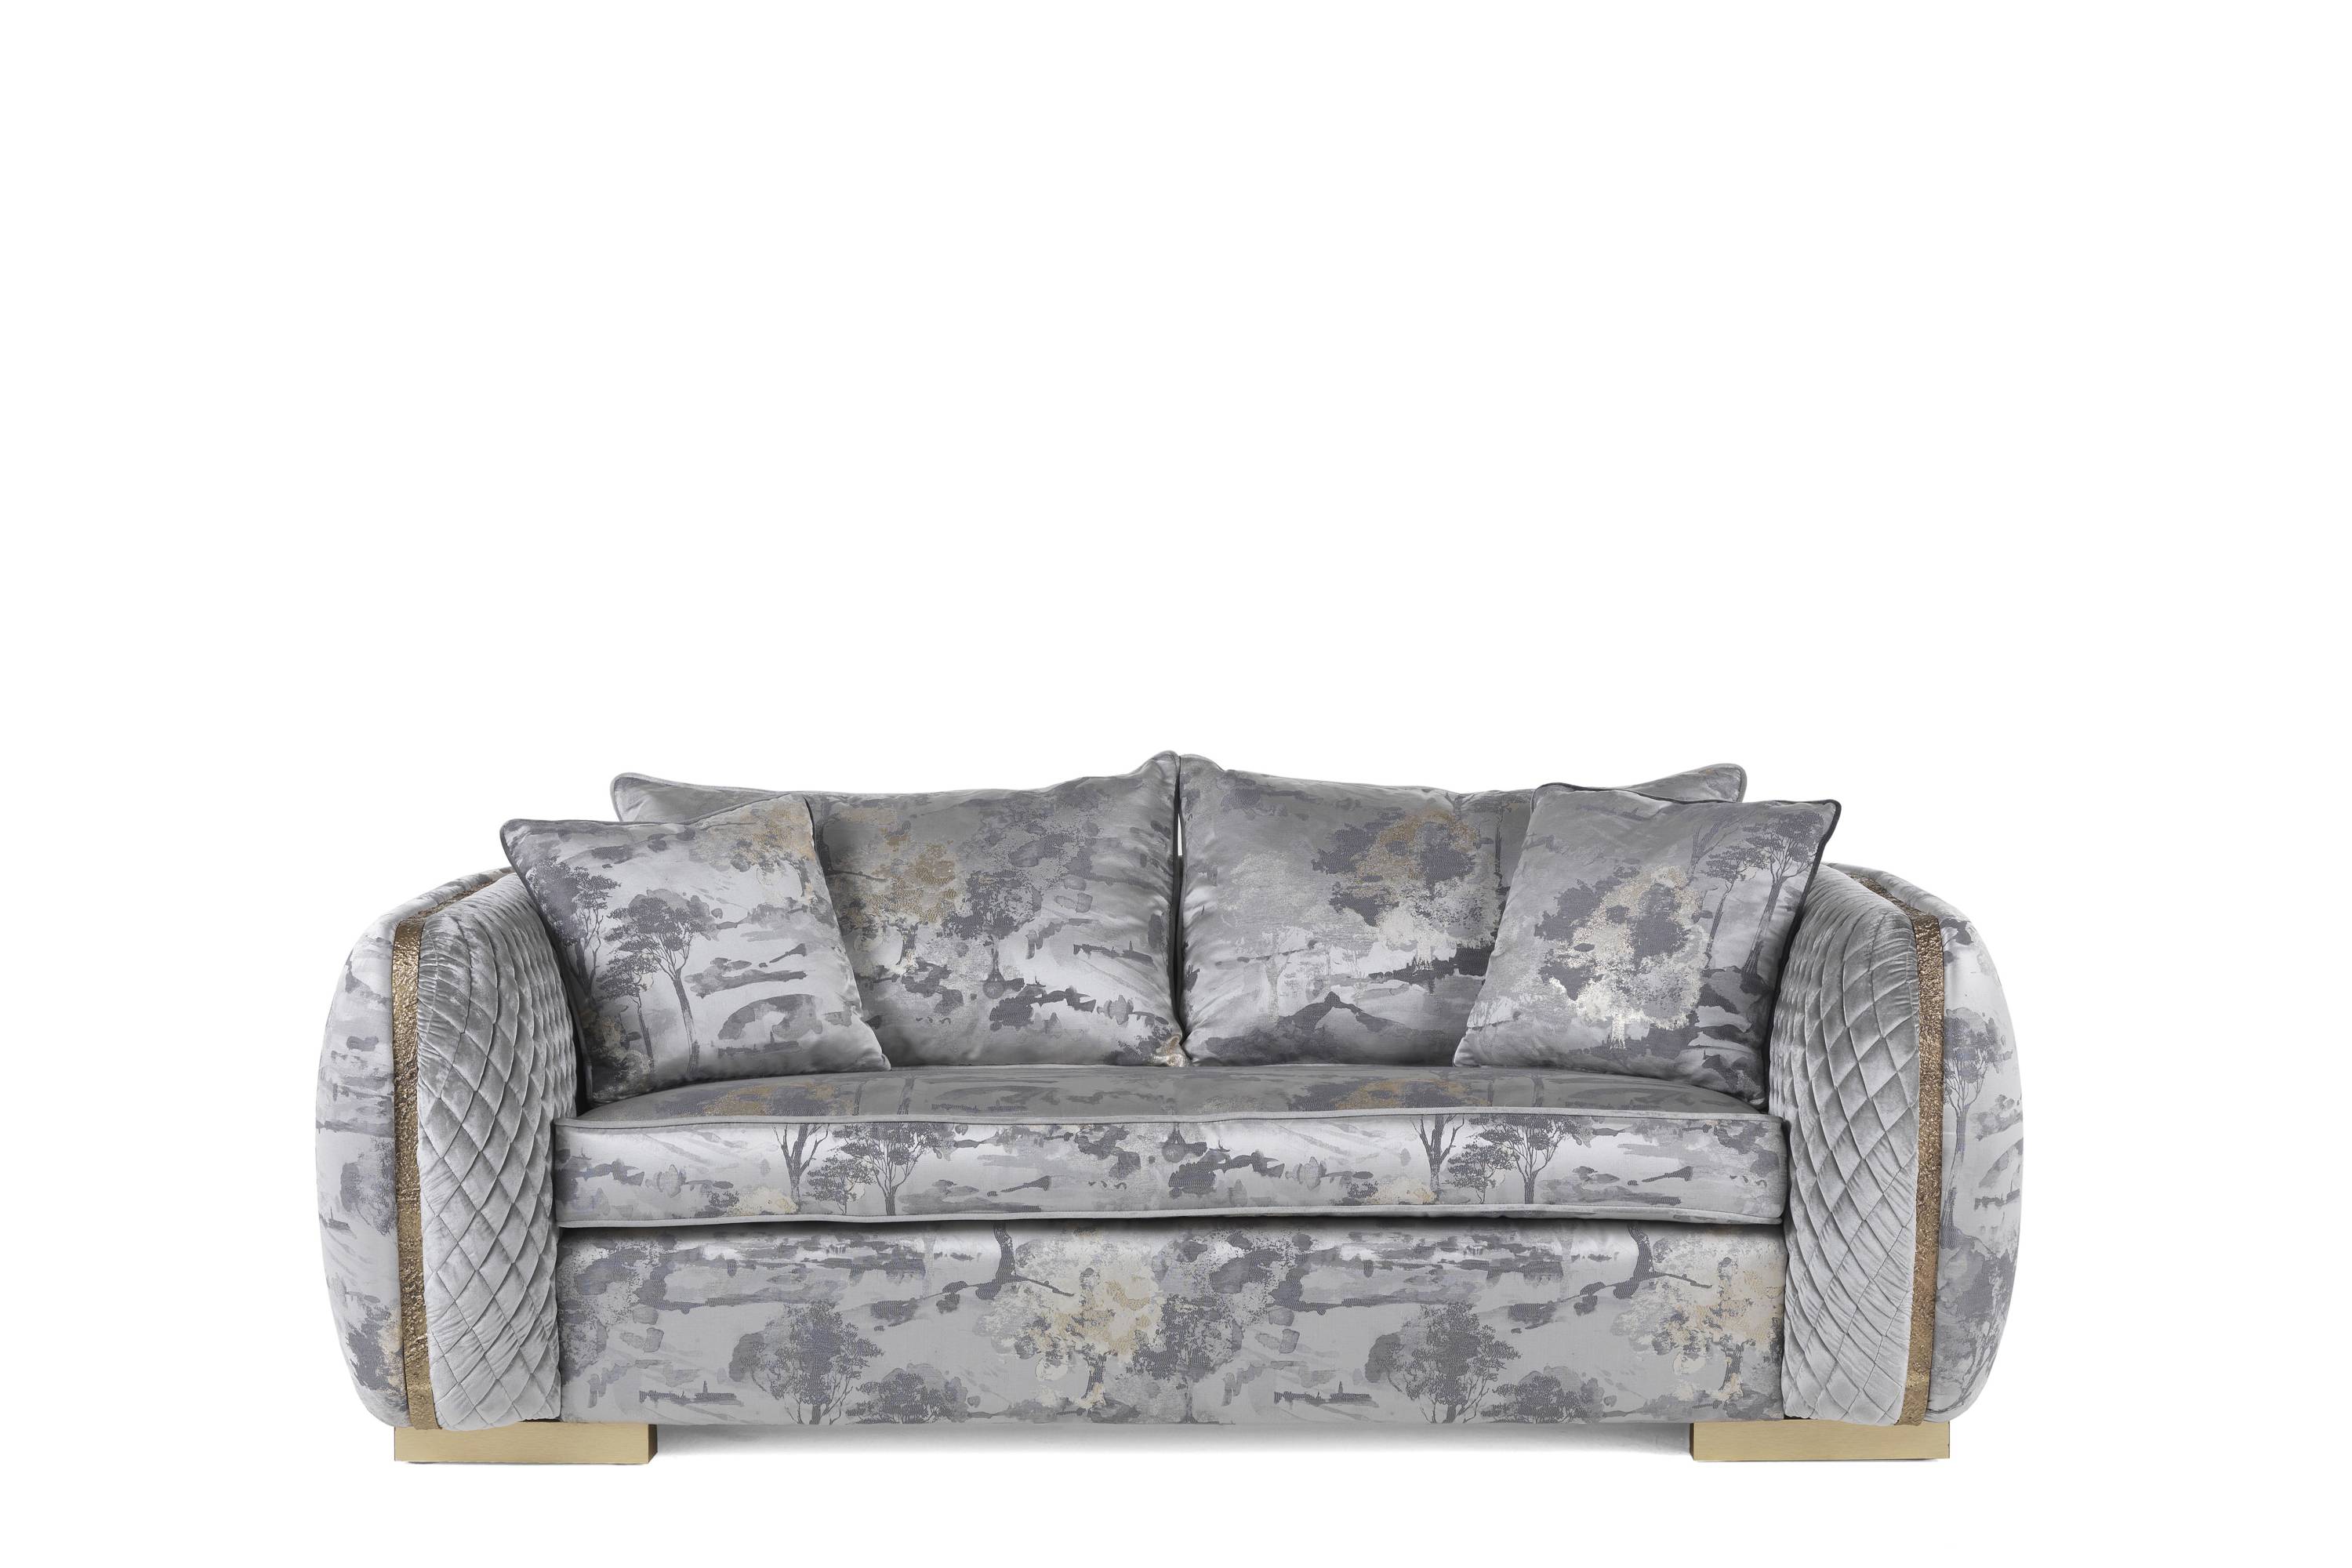 ARKÈ 2-seater sofa - 3-seater sofa - Bespoke projects with luxury Made in Italy classic furniture